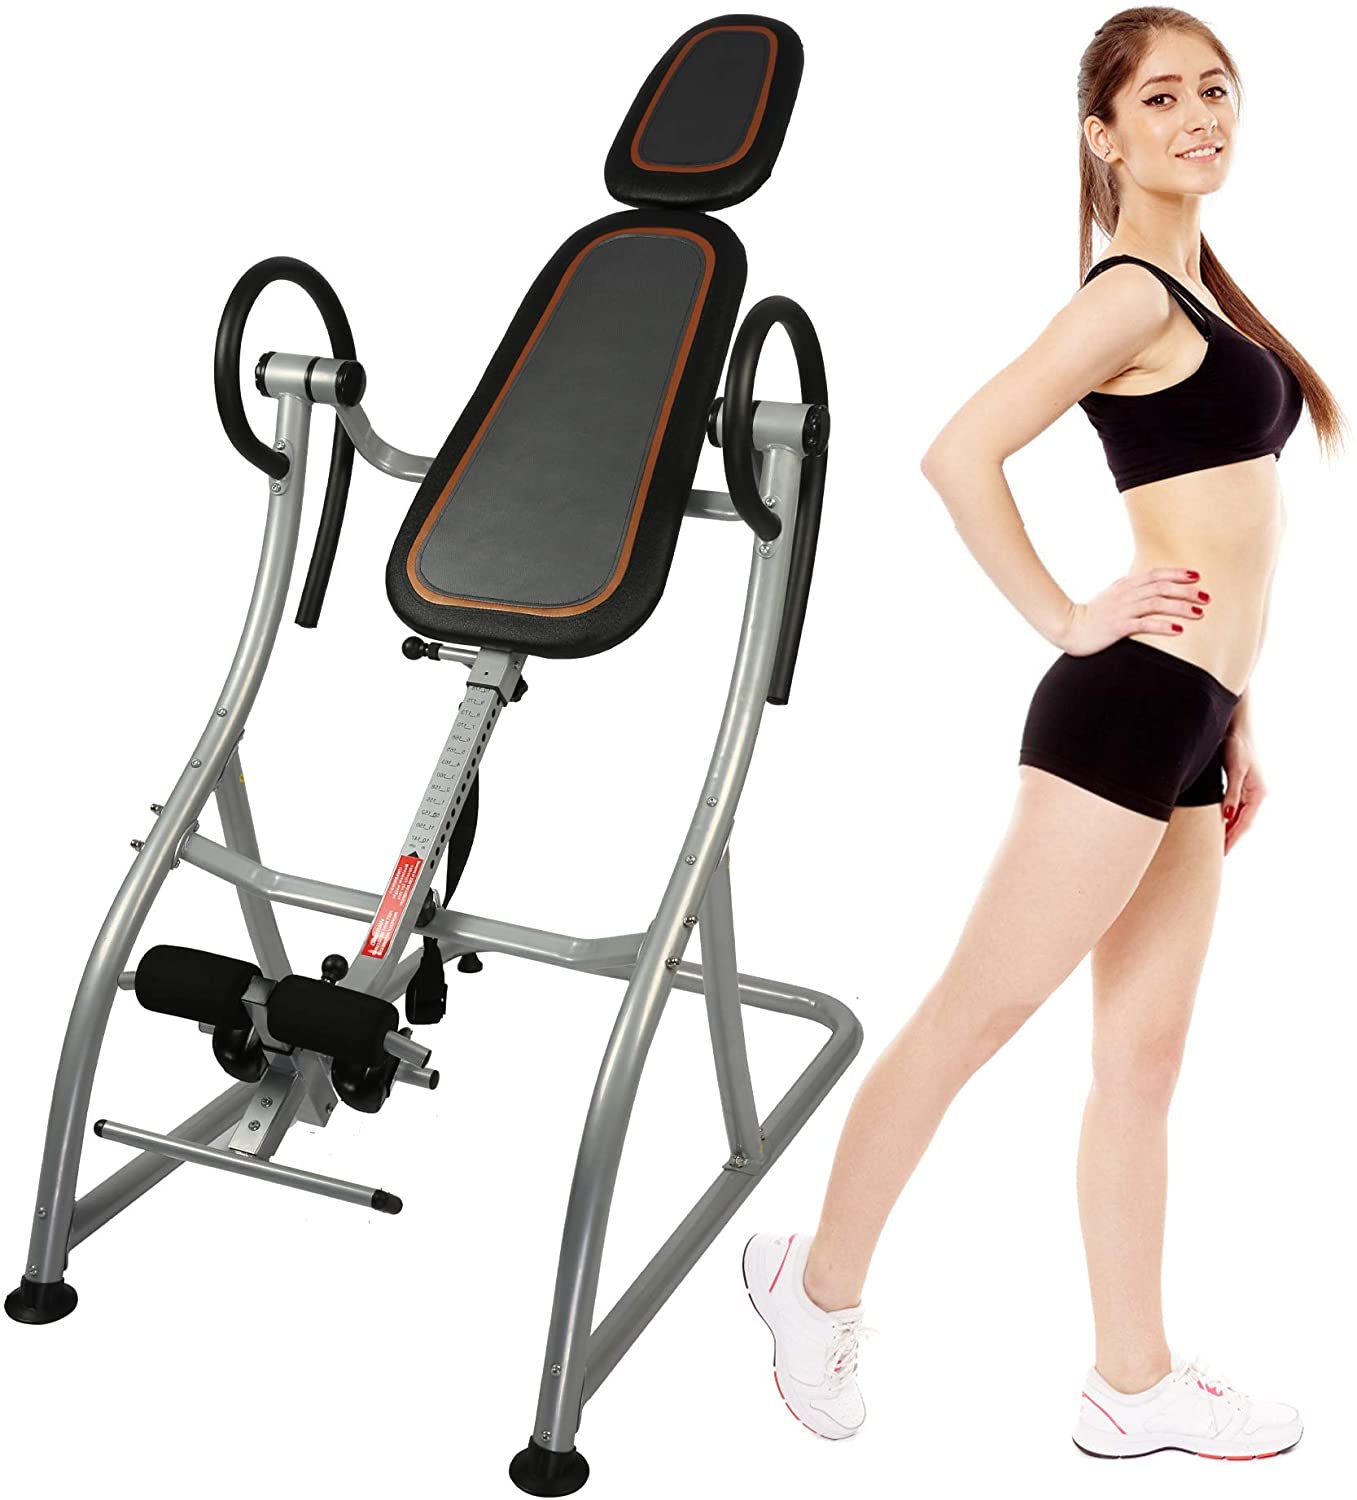 Heavy Duty Inversion Table 58-78 Inches Adjustable Pain Therapy Training with Protective Belt Support up to 330LBS